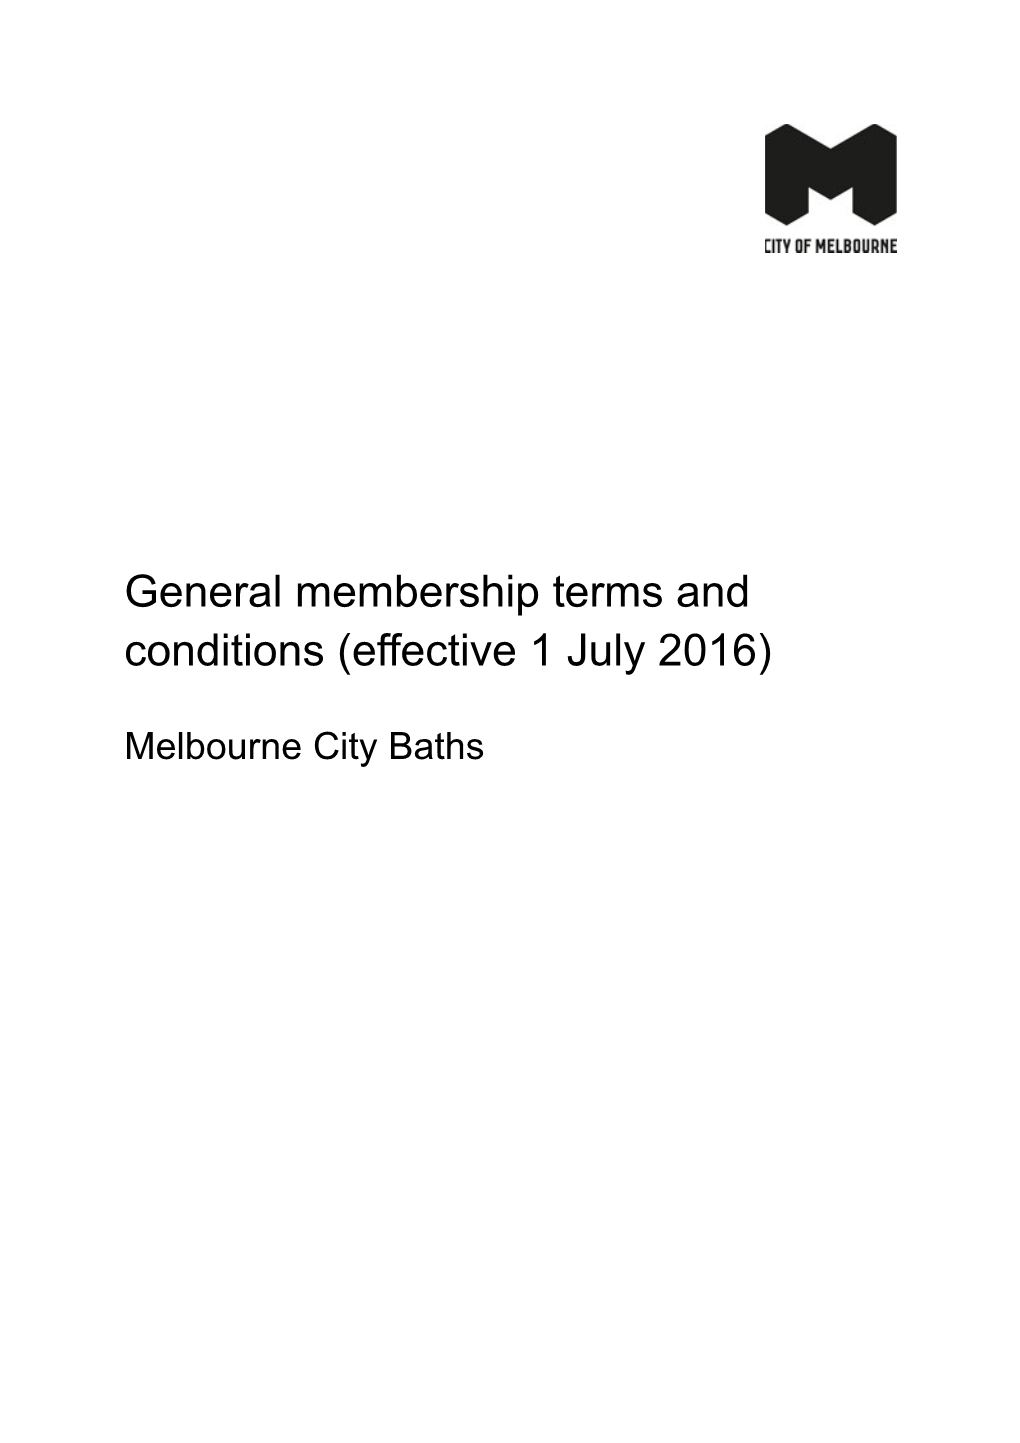 MCG General Membership Terms and Conditions